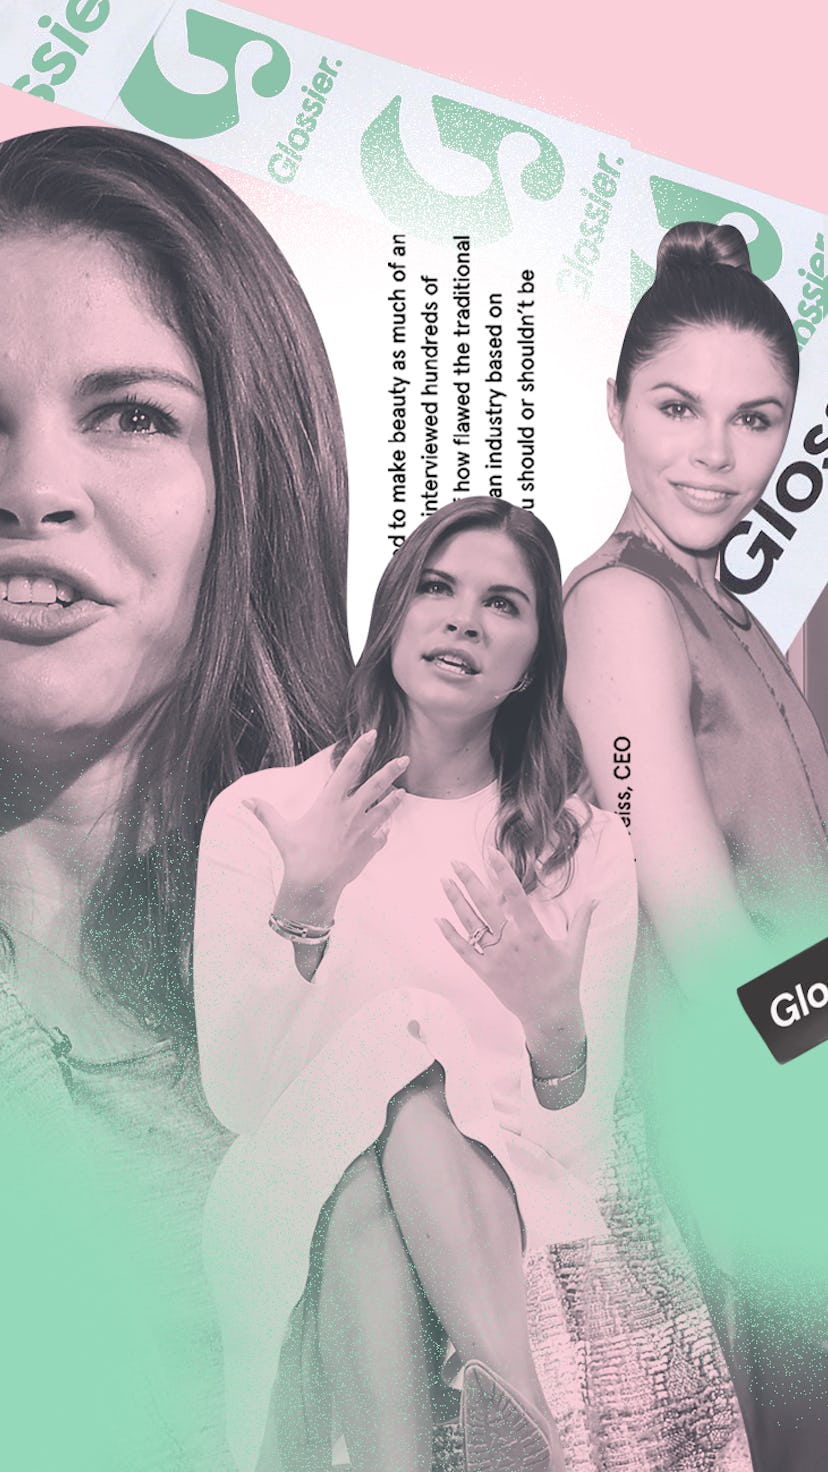 Collage of Emily Weiss' photos, Glossier products and the Glossier logo